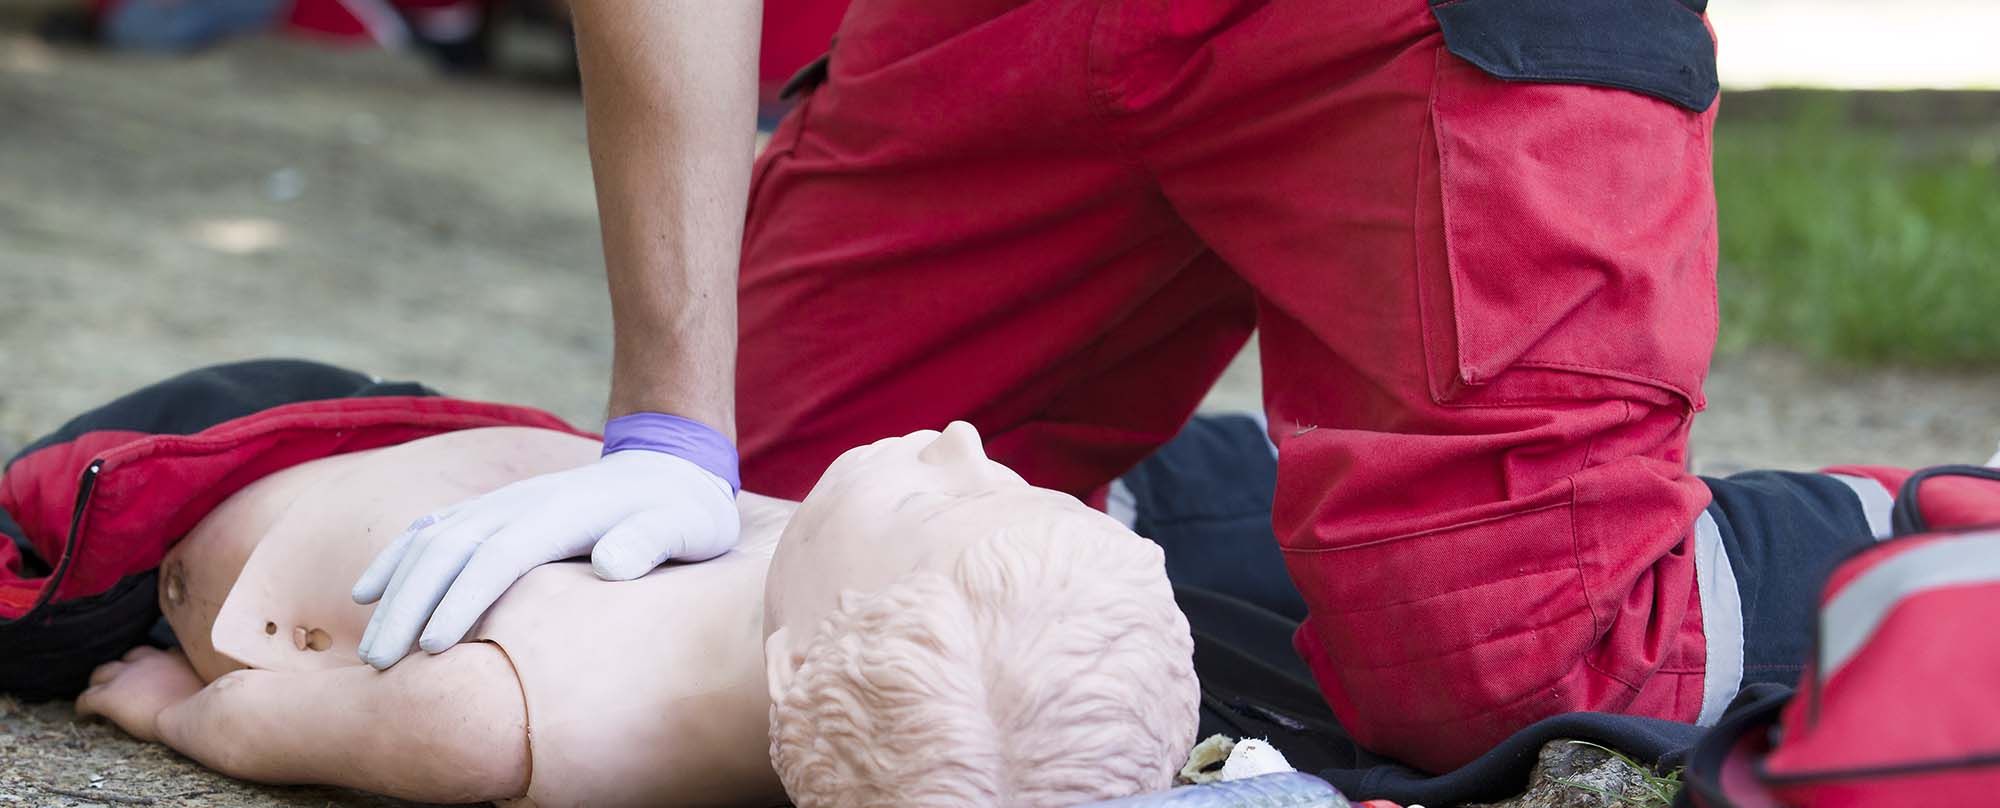 Image of a person teaching CPR on a dummy